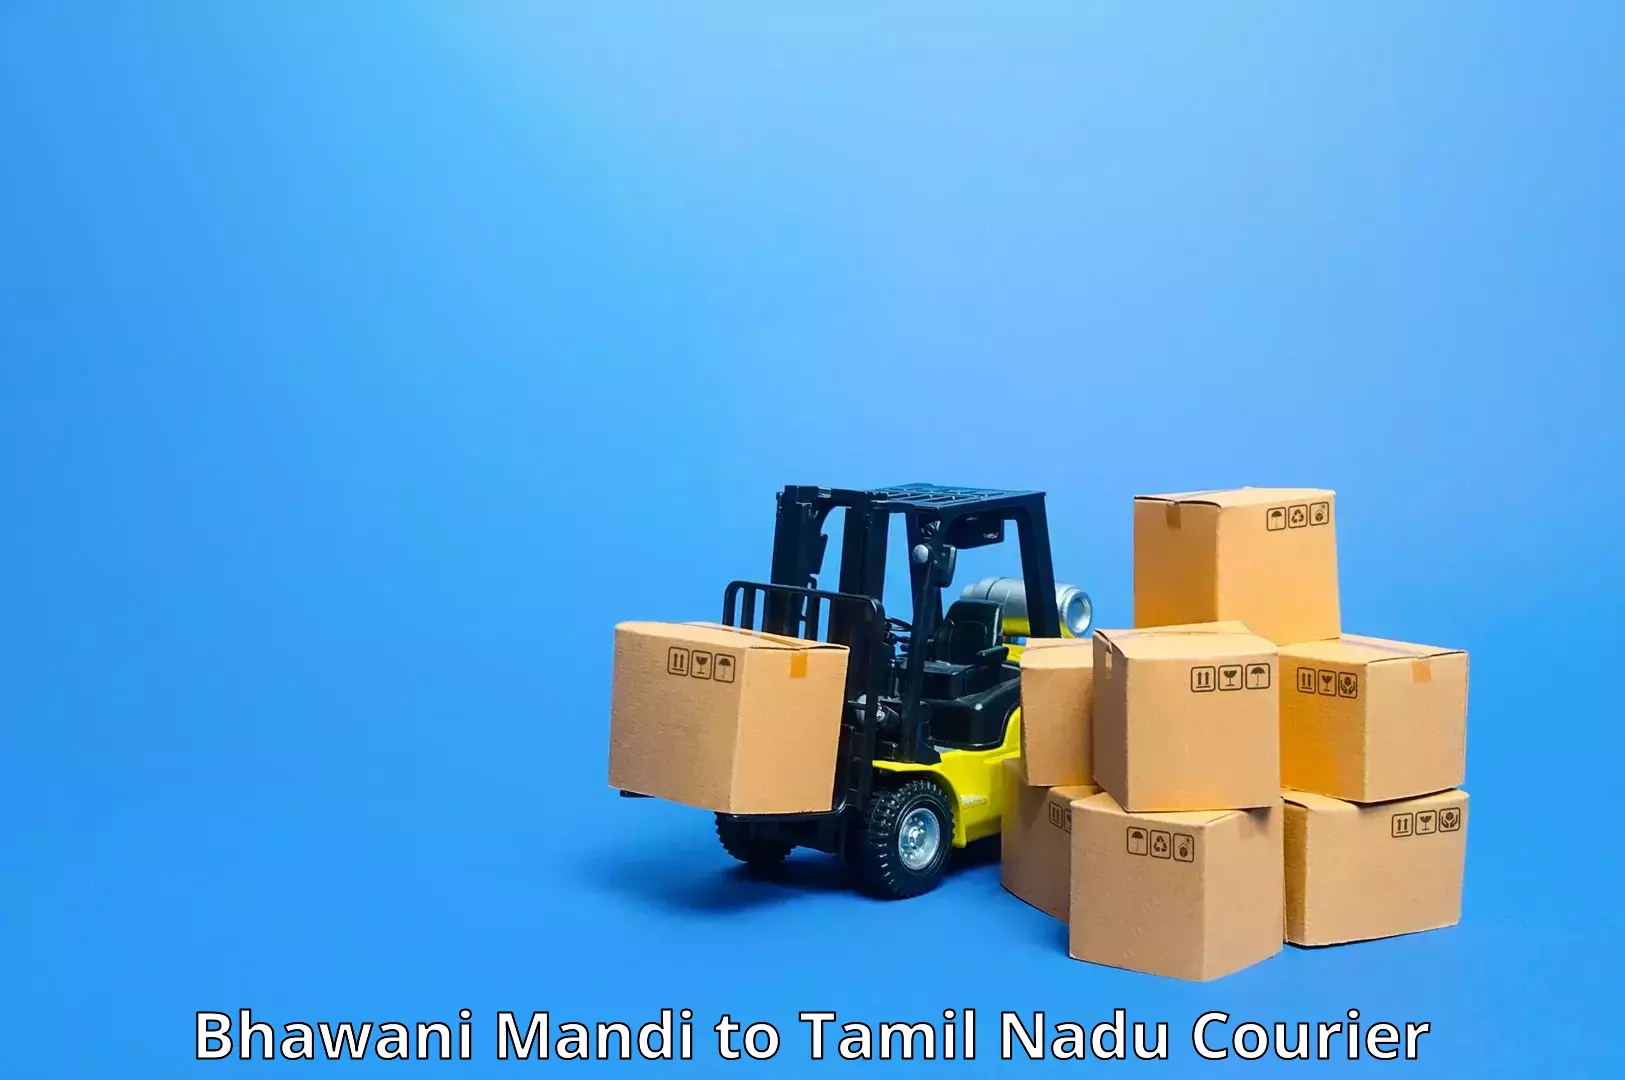 Air courier services in Bhawani Mandi to Ennore Port Chennai